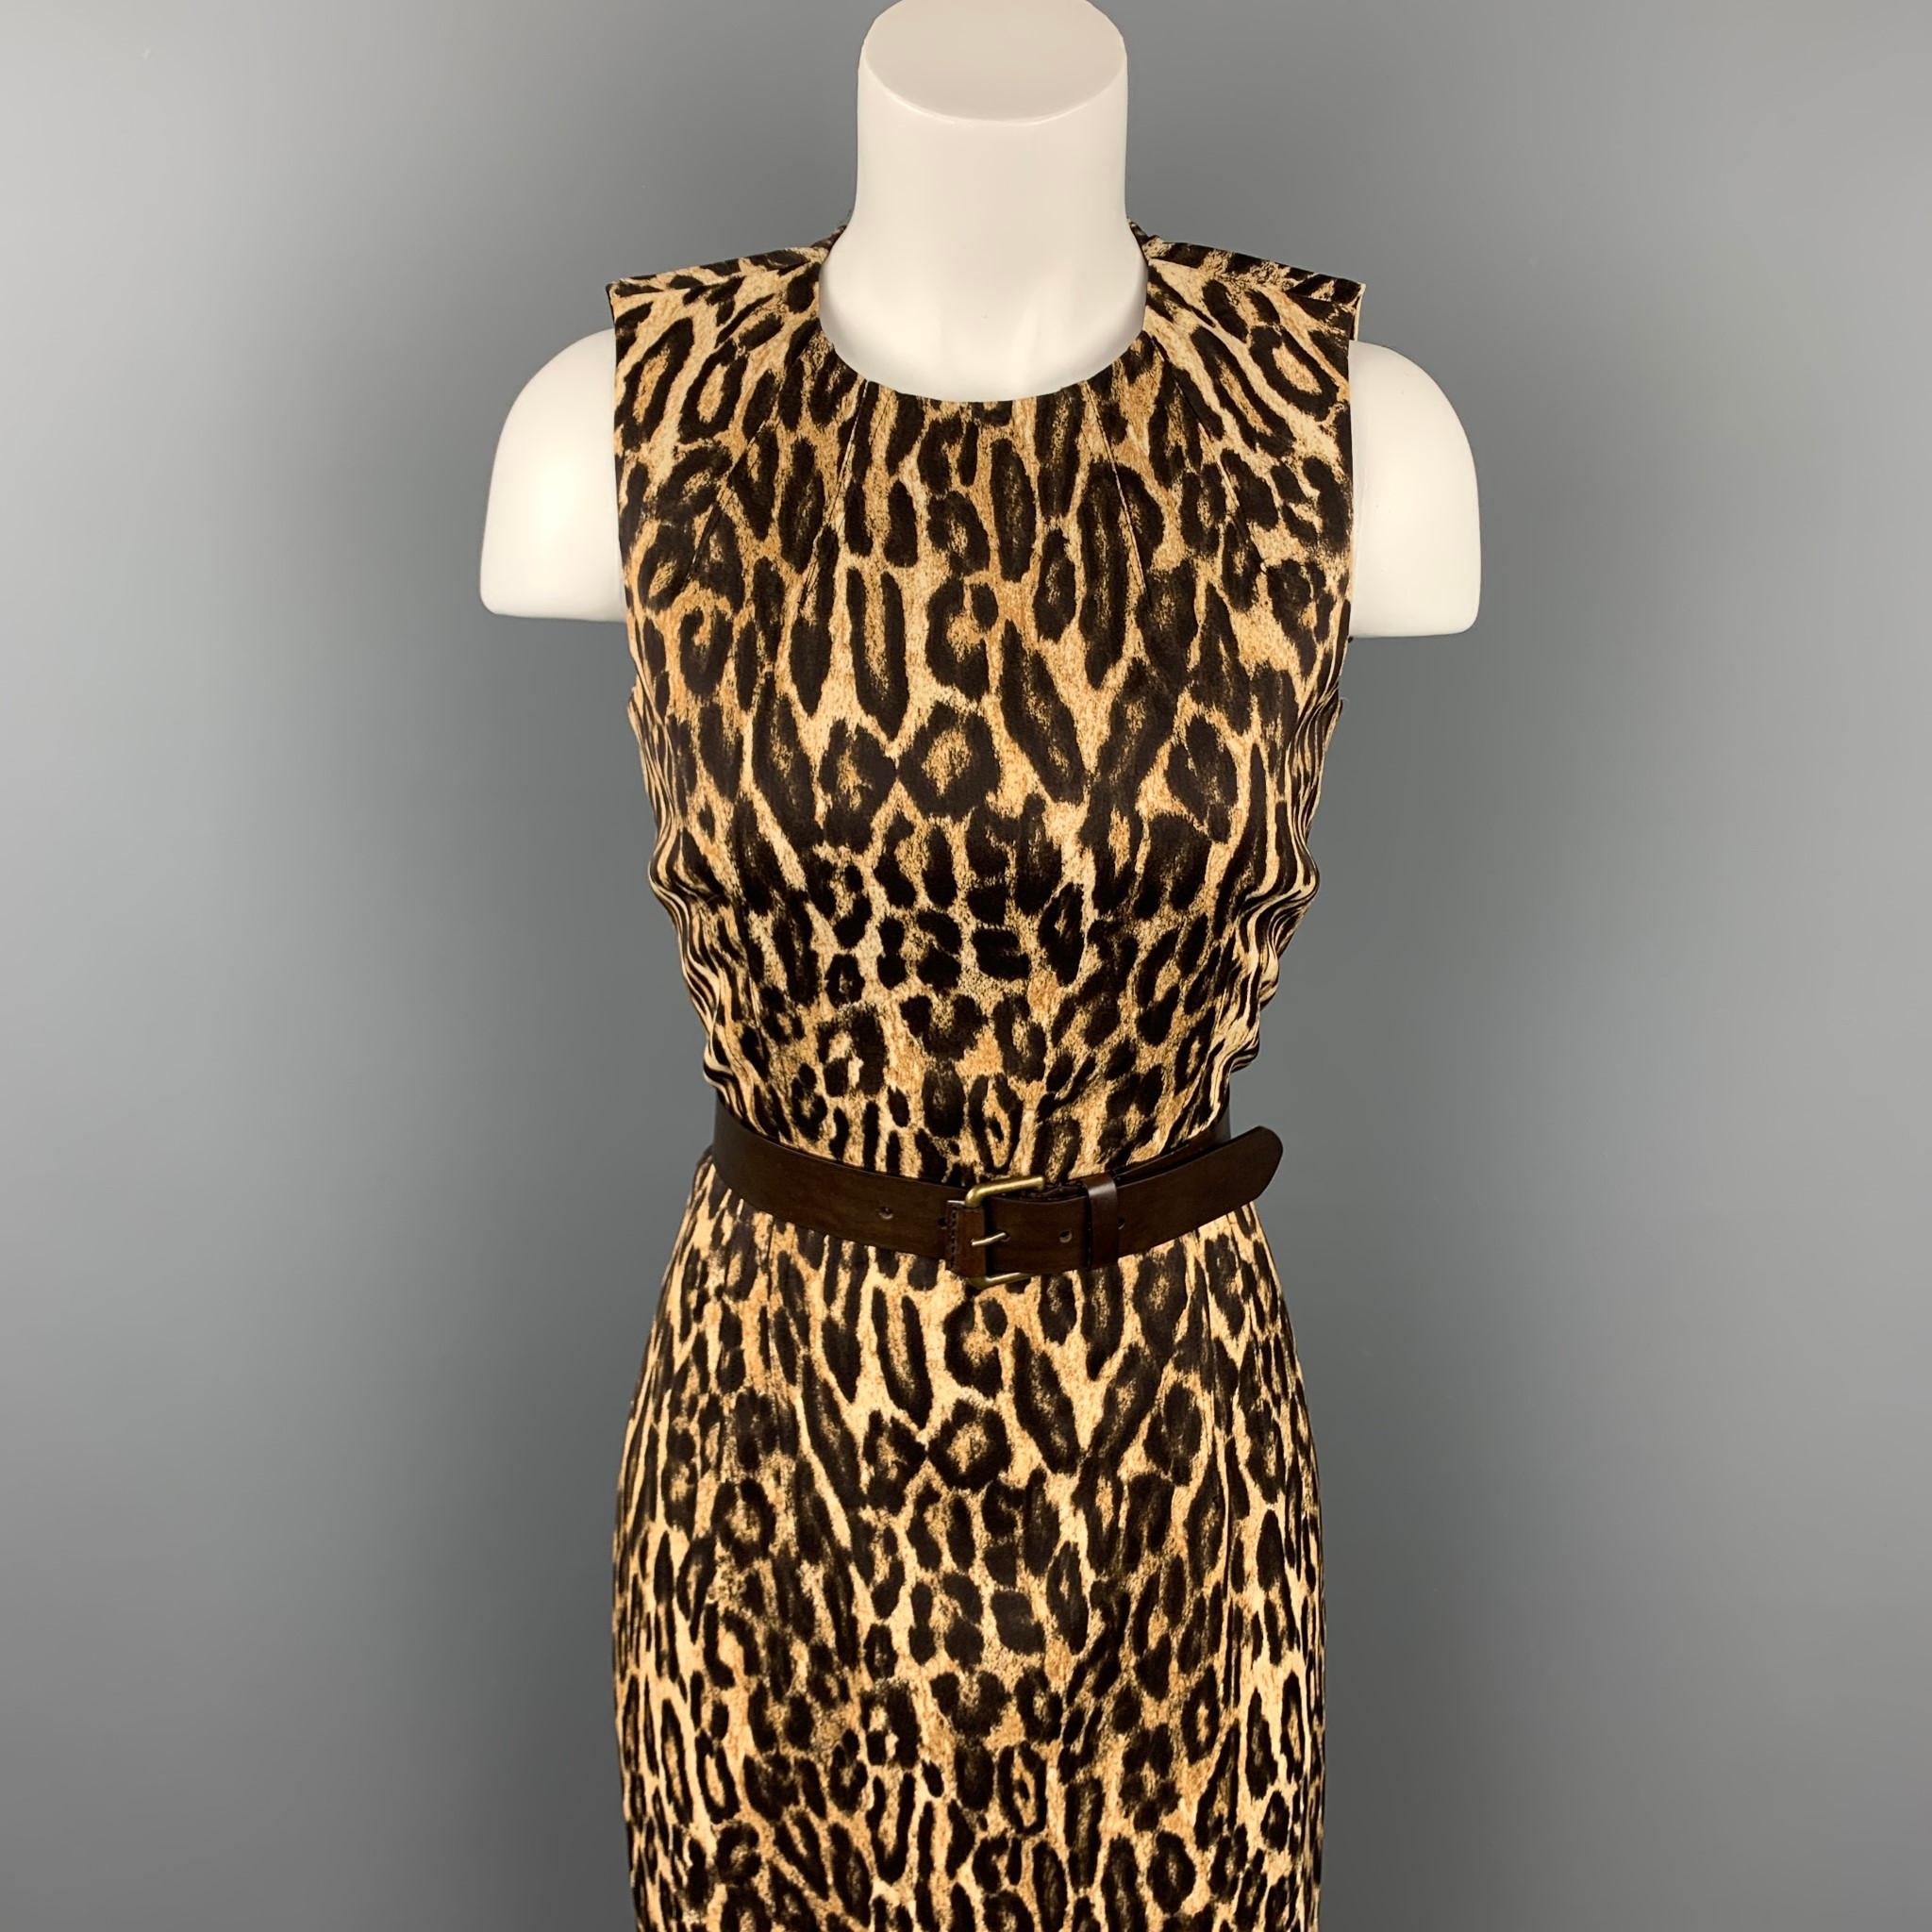 MICHAEL KORS dress comes in a brown leopard print rayon / spandex featuring a shift style, belted, and a back zip up closure. Made in Italy.

Very Good Pre-Owned Condition.
Marked:

Measurements:

Bust: 30 in.
Waist: 28 in.
Hip: 34 in.
Length: 41 in.